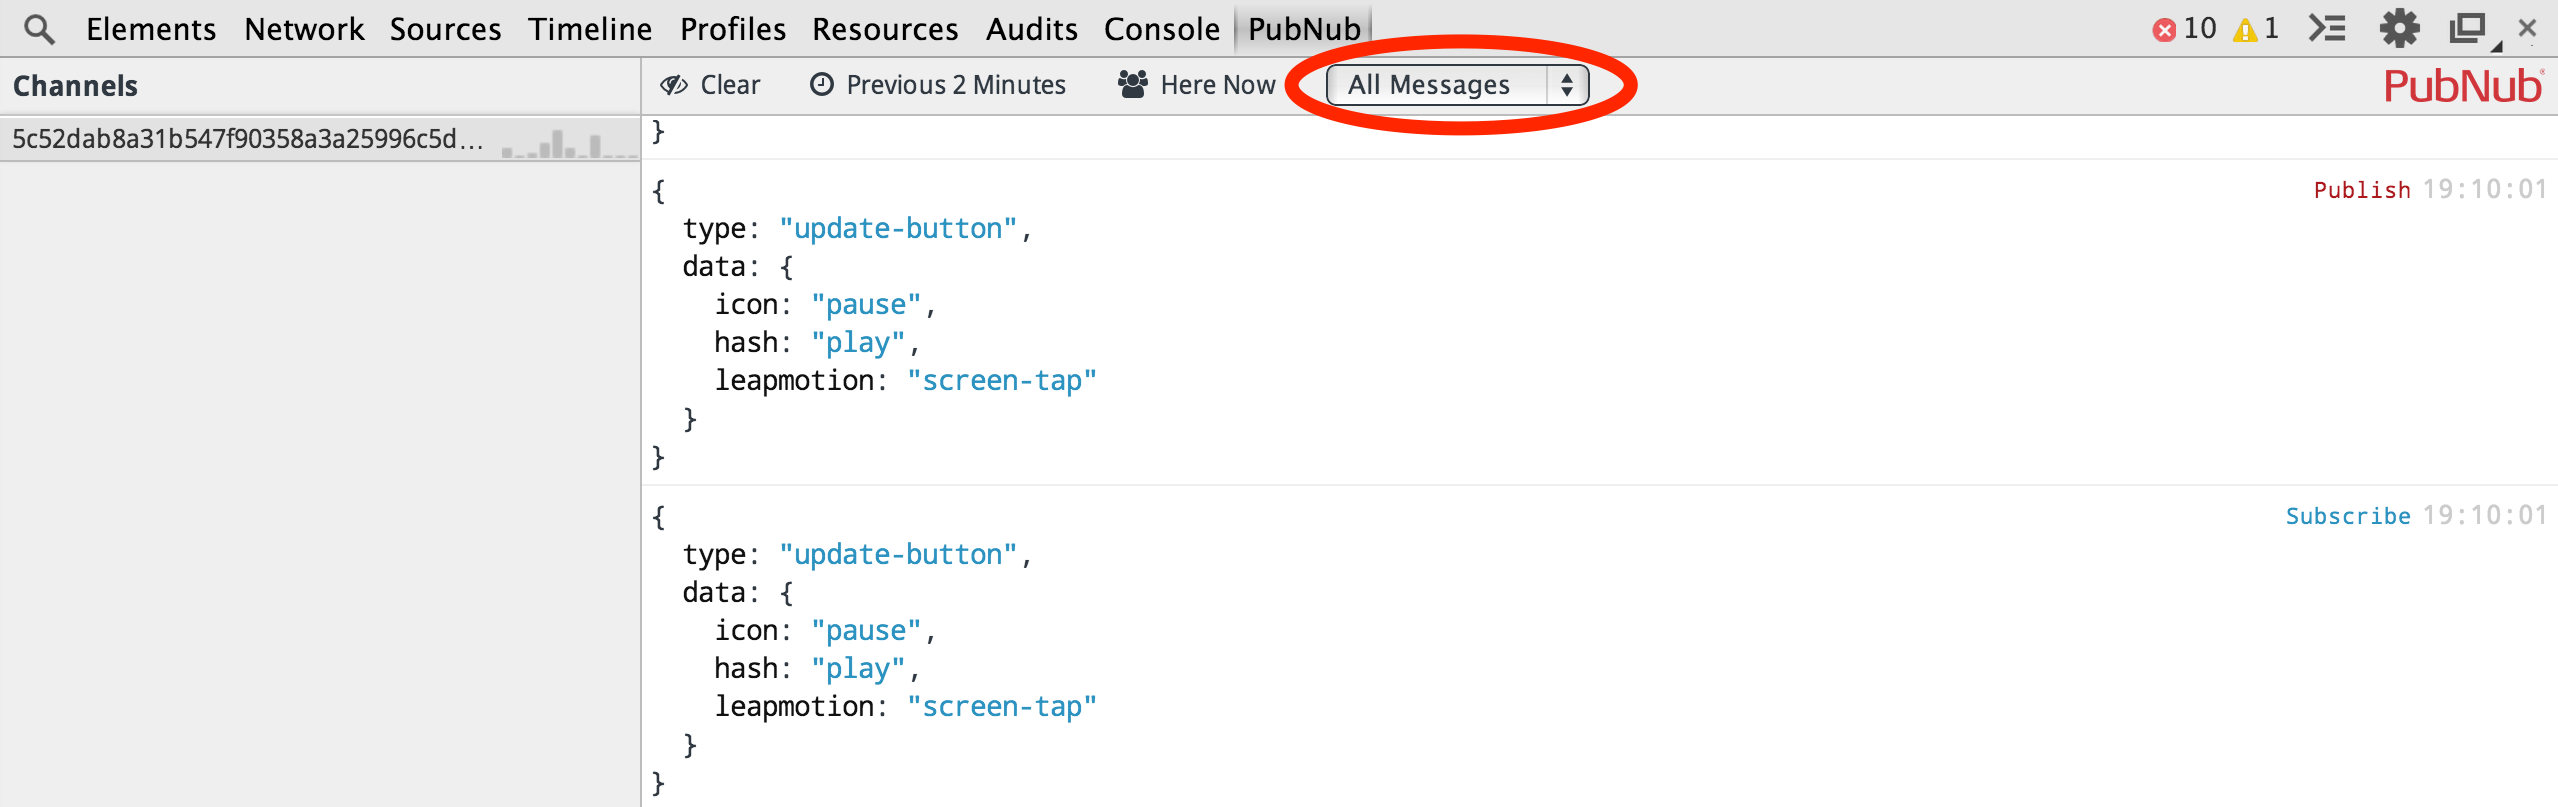 PubNub console includes capability to filter the type of message